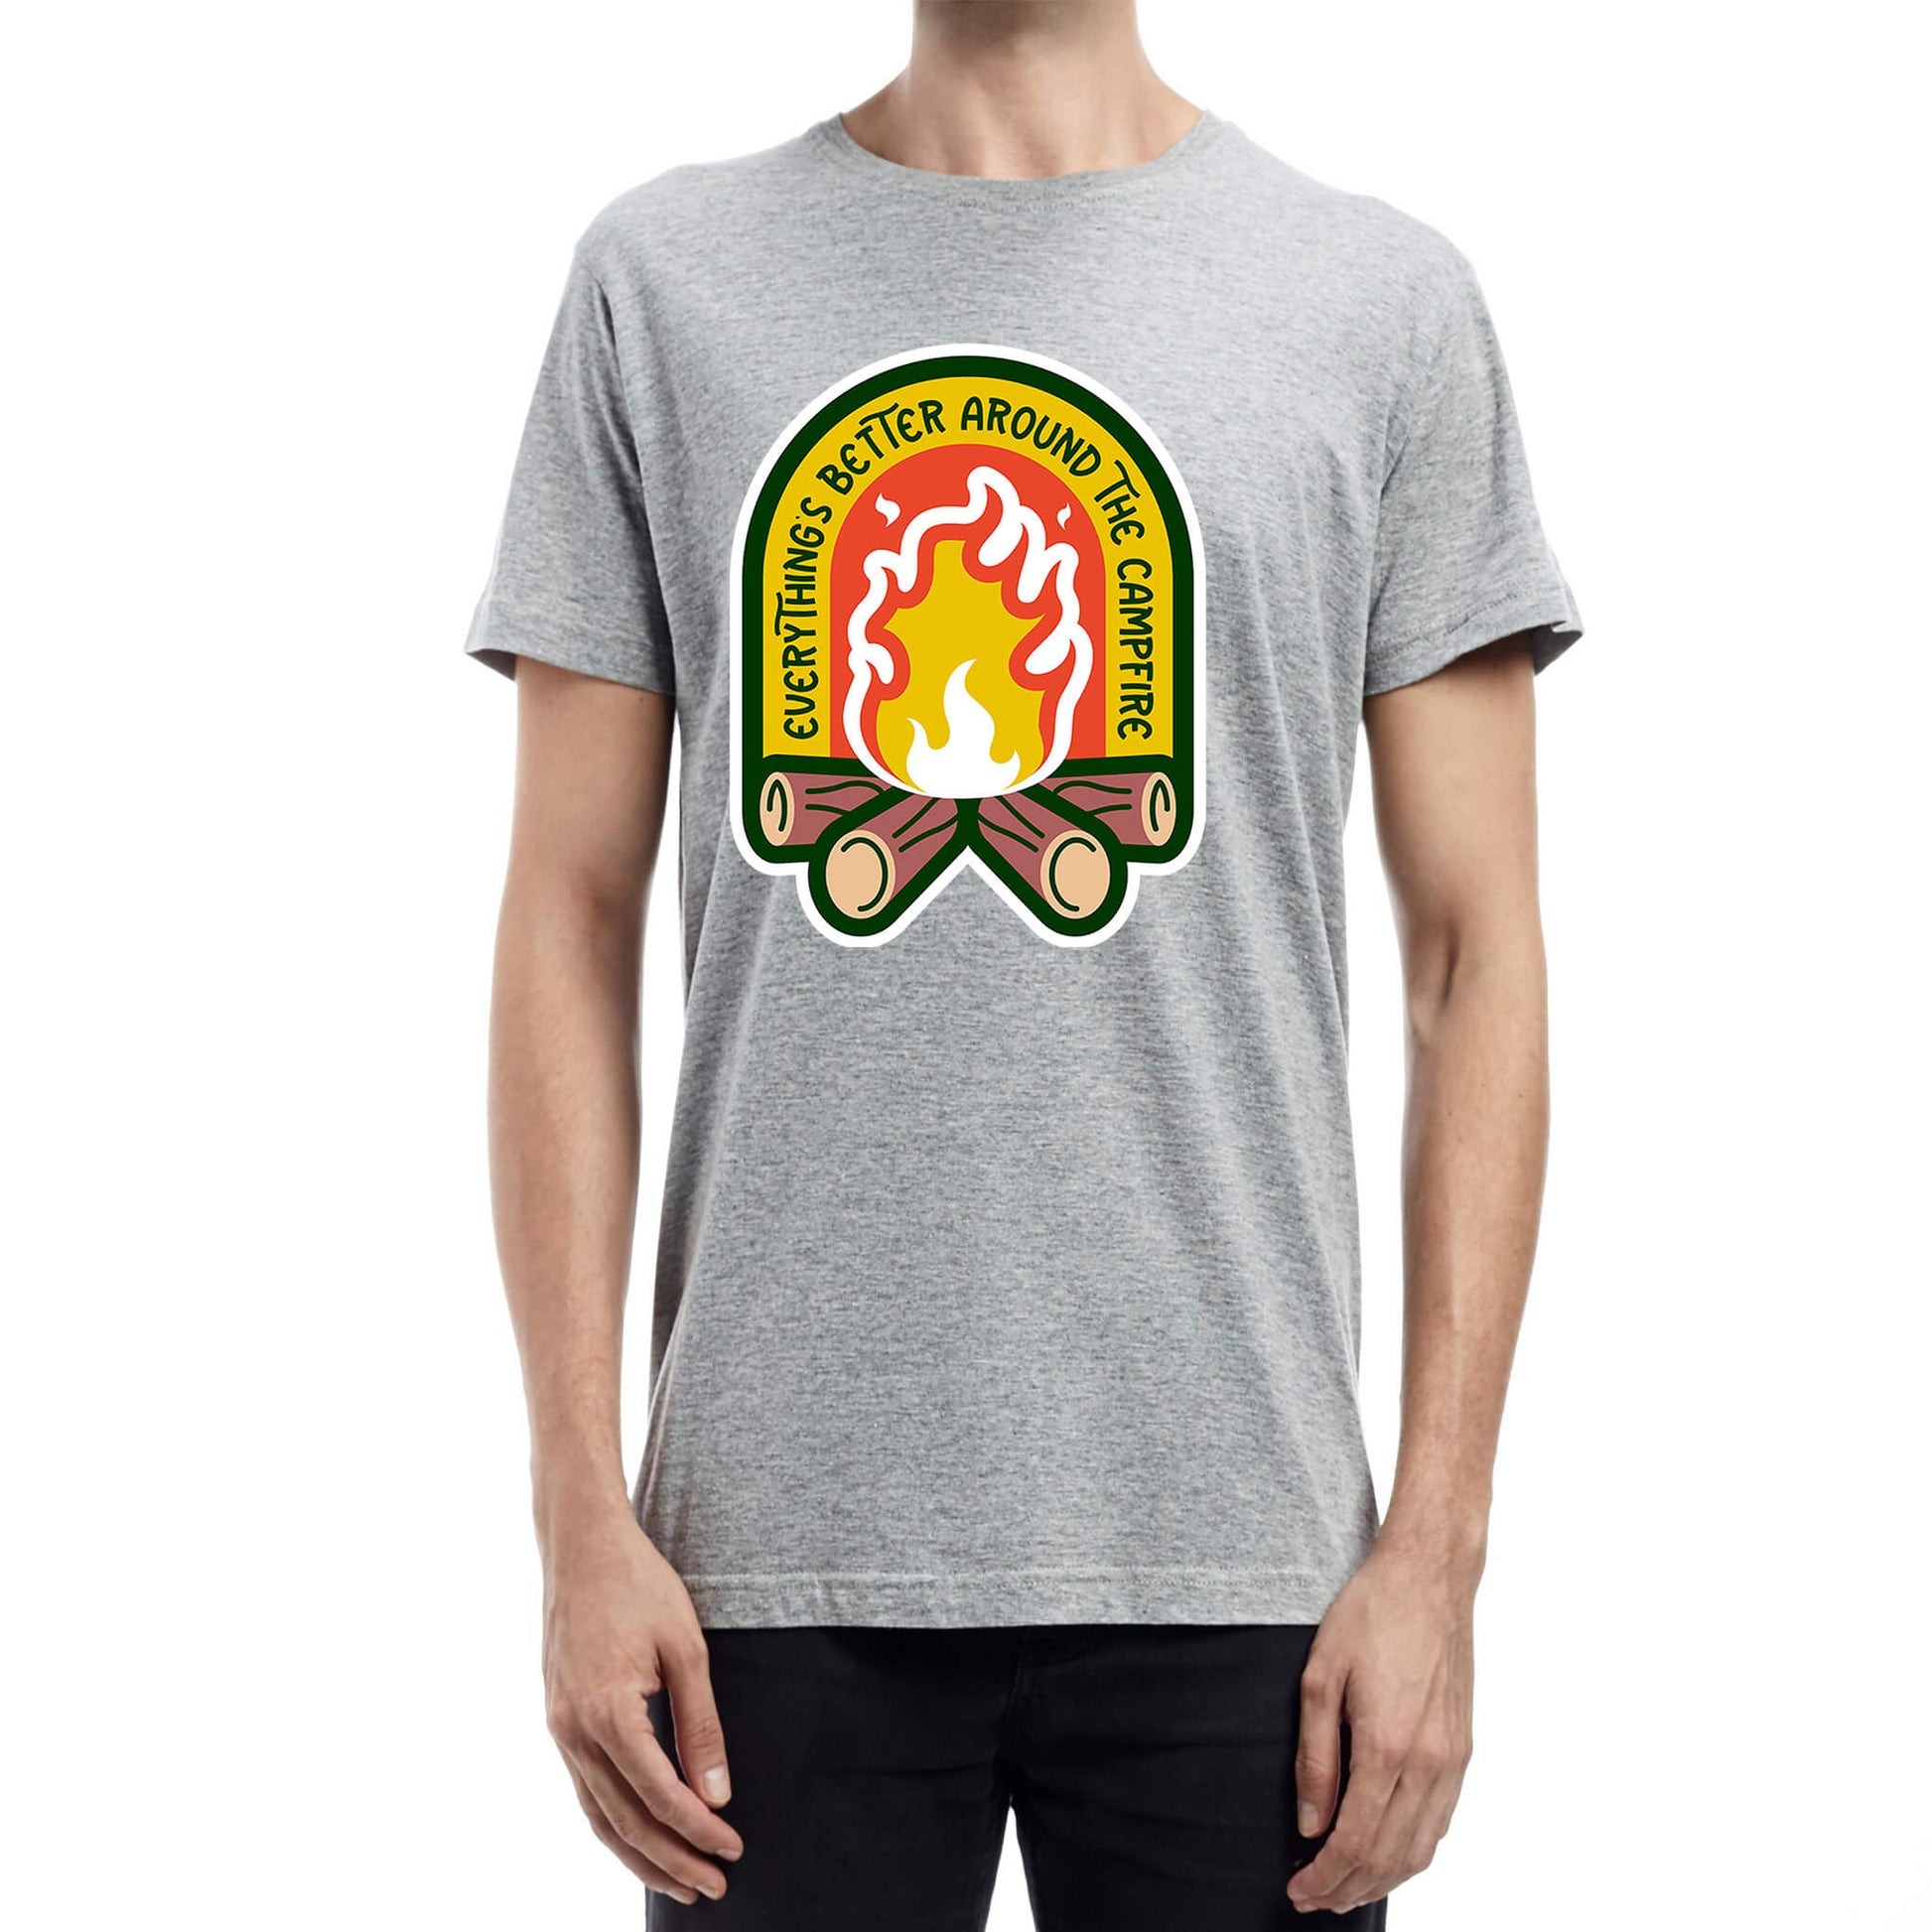 "grey Cozy tee featuring a campfire image, perfect for outdoor enthusiasts. Text says: 'Everything is better around the campfire.' Embrace the warmth and camaraderie!"